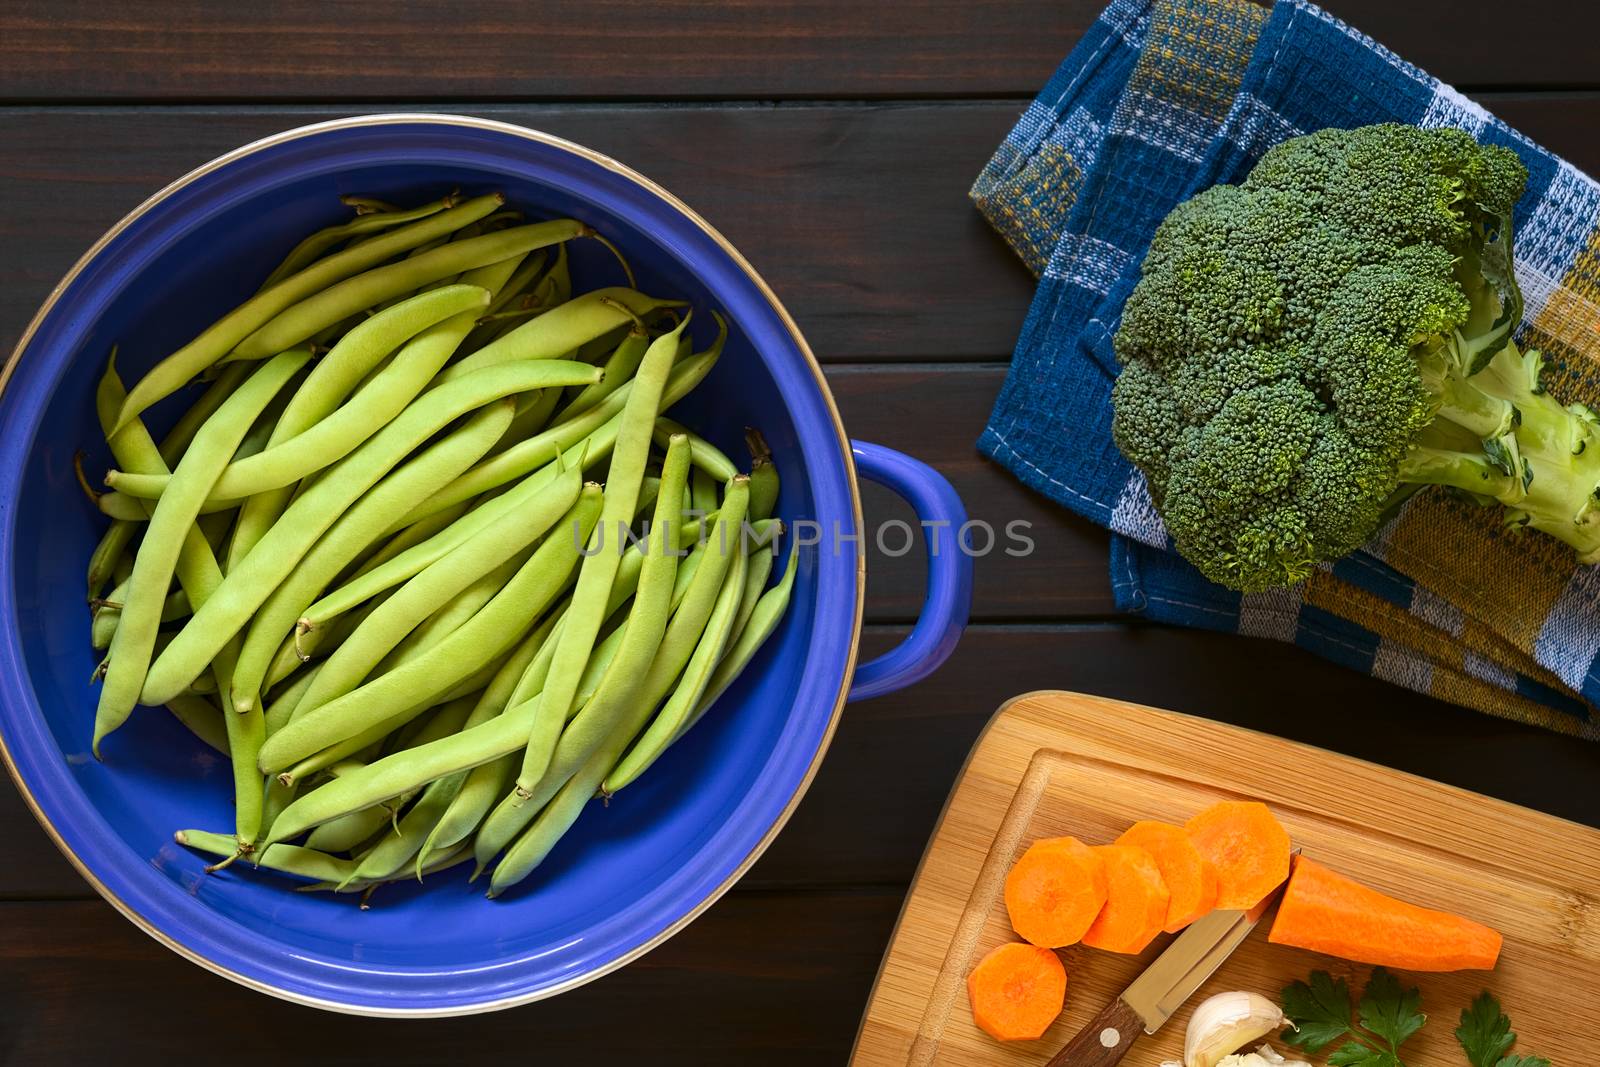 Overhead shot of green beans in blue metal strainer with broccoli, and cut carrot on the side, photographed on dark wood with natural light